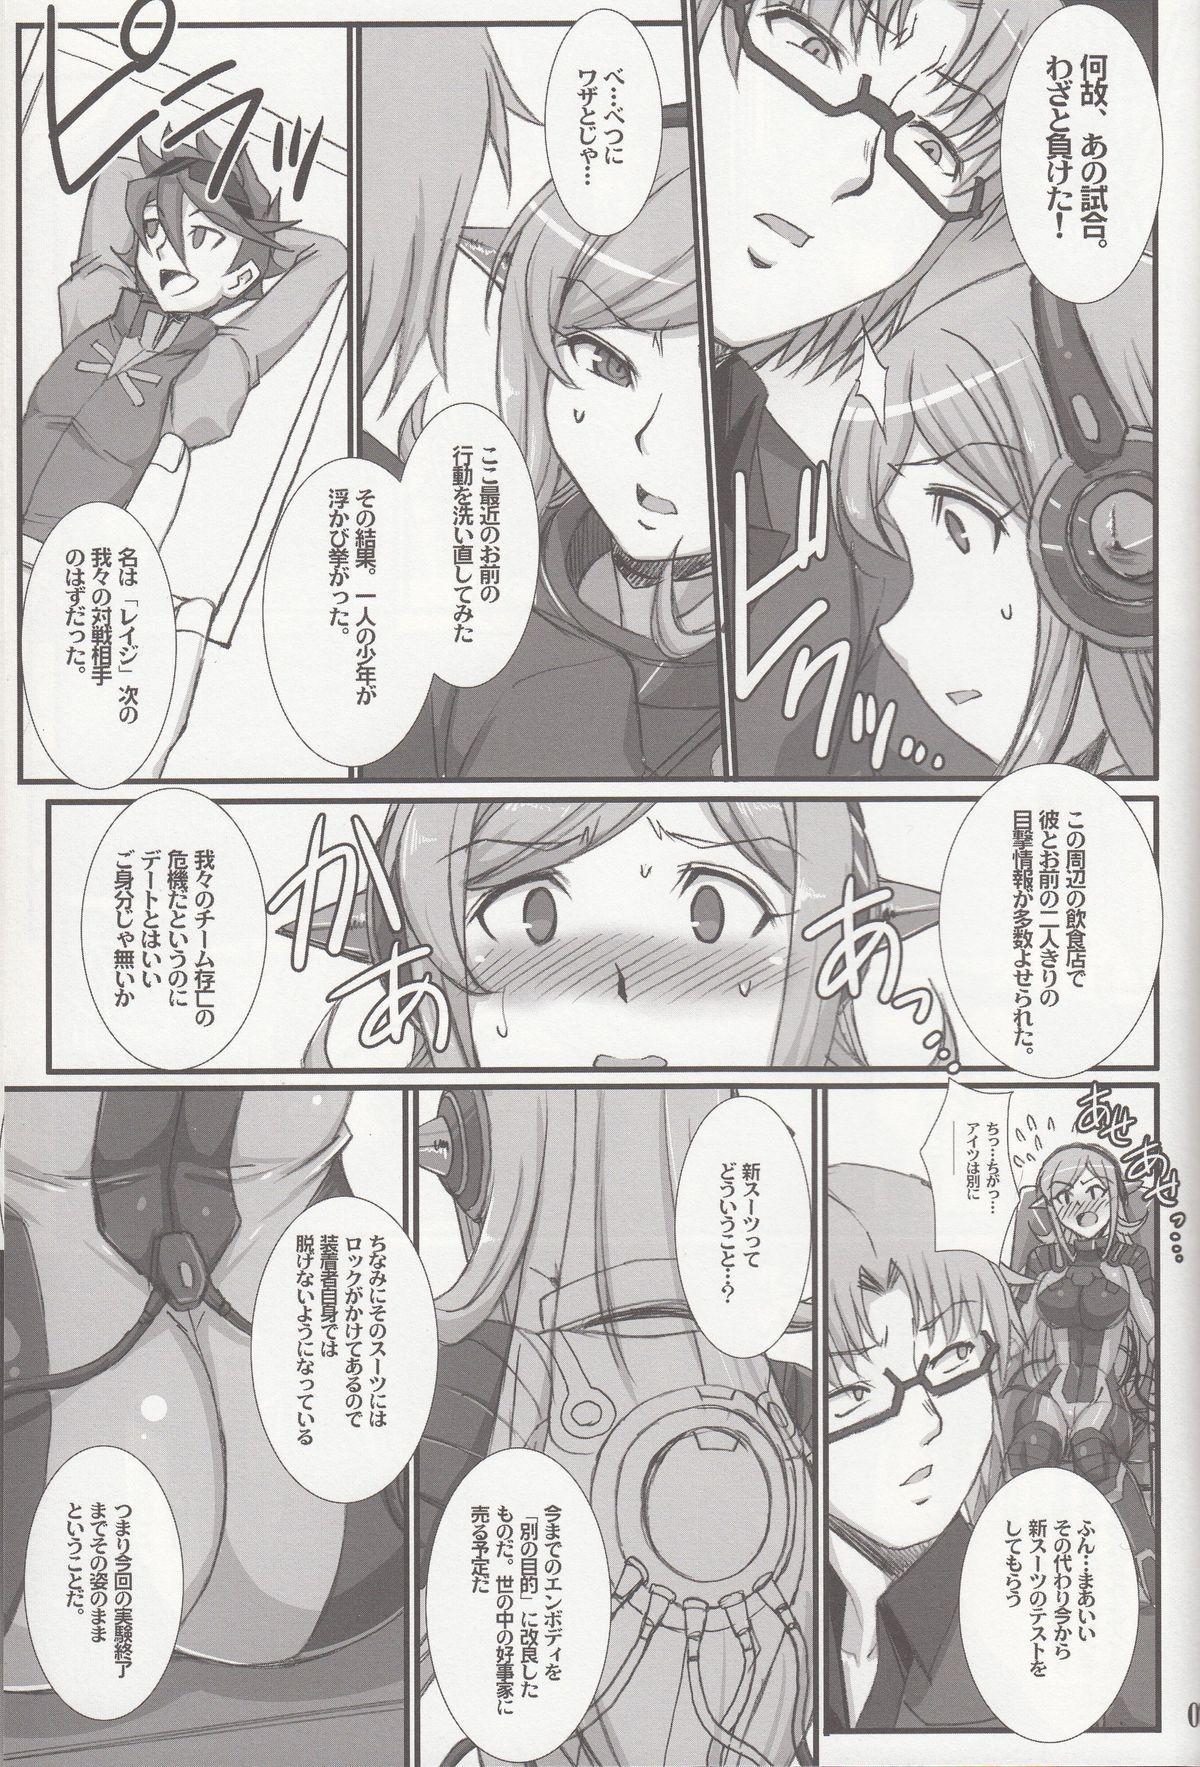 Cocksucking Inexhaustible pleasure - Gundam build fighters Fuck My Pussy Hard - Page 6